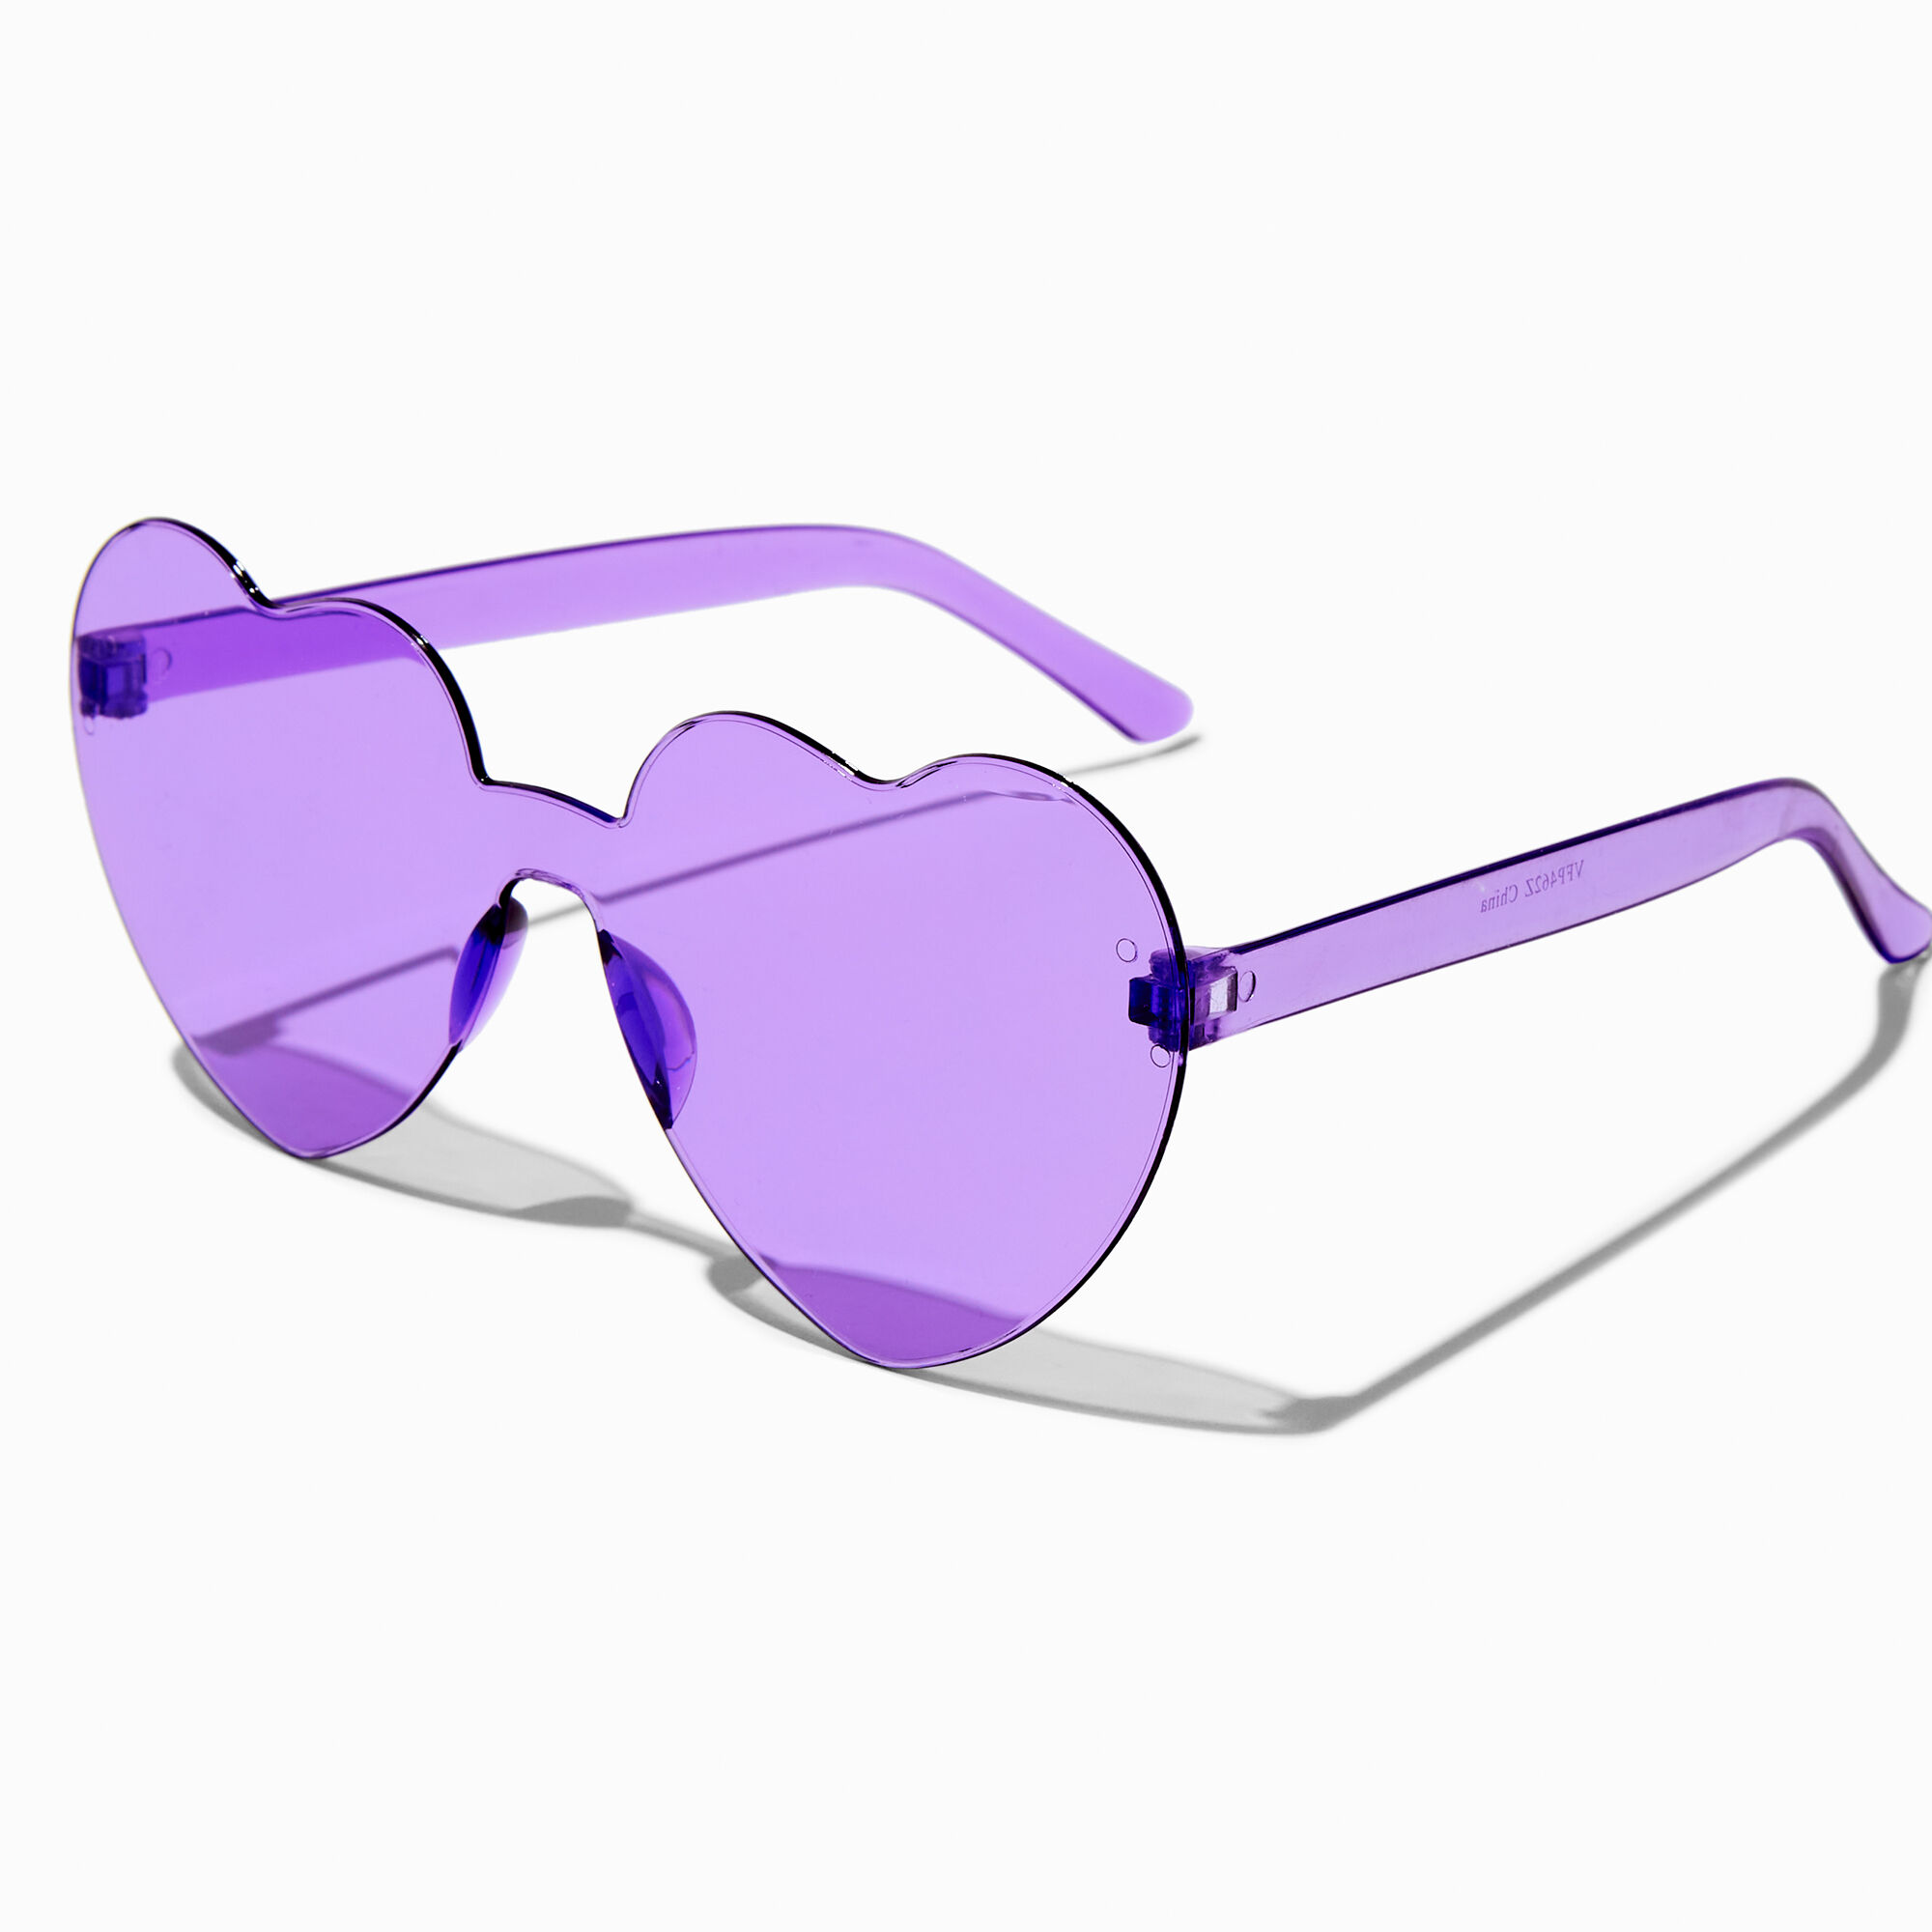 View Claires Heart Shaped Rimless Sunglasses Purple information